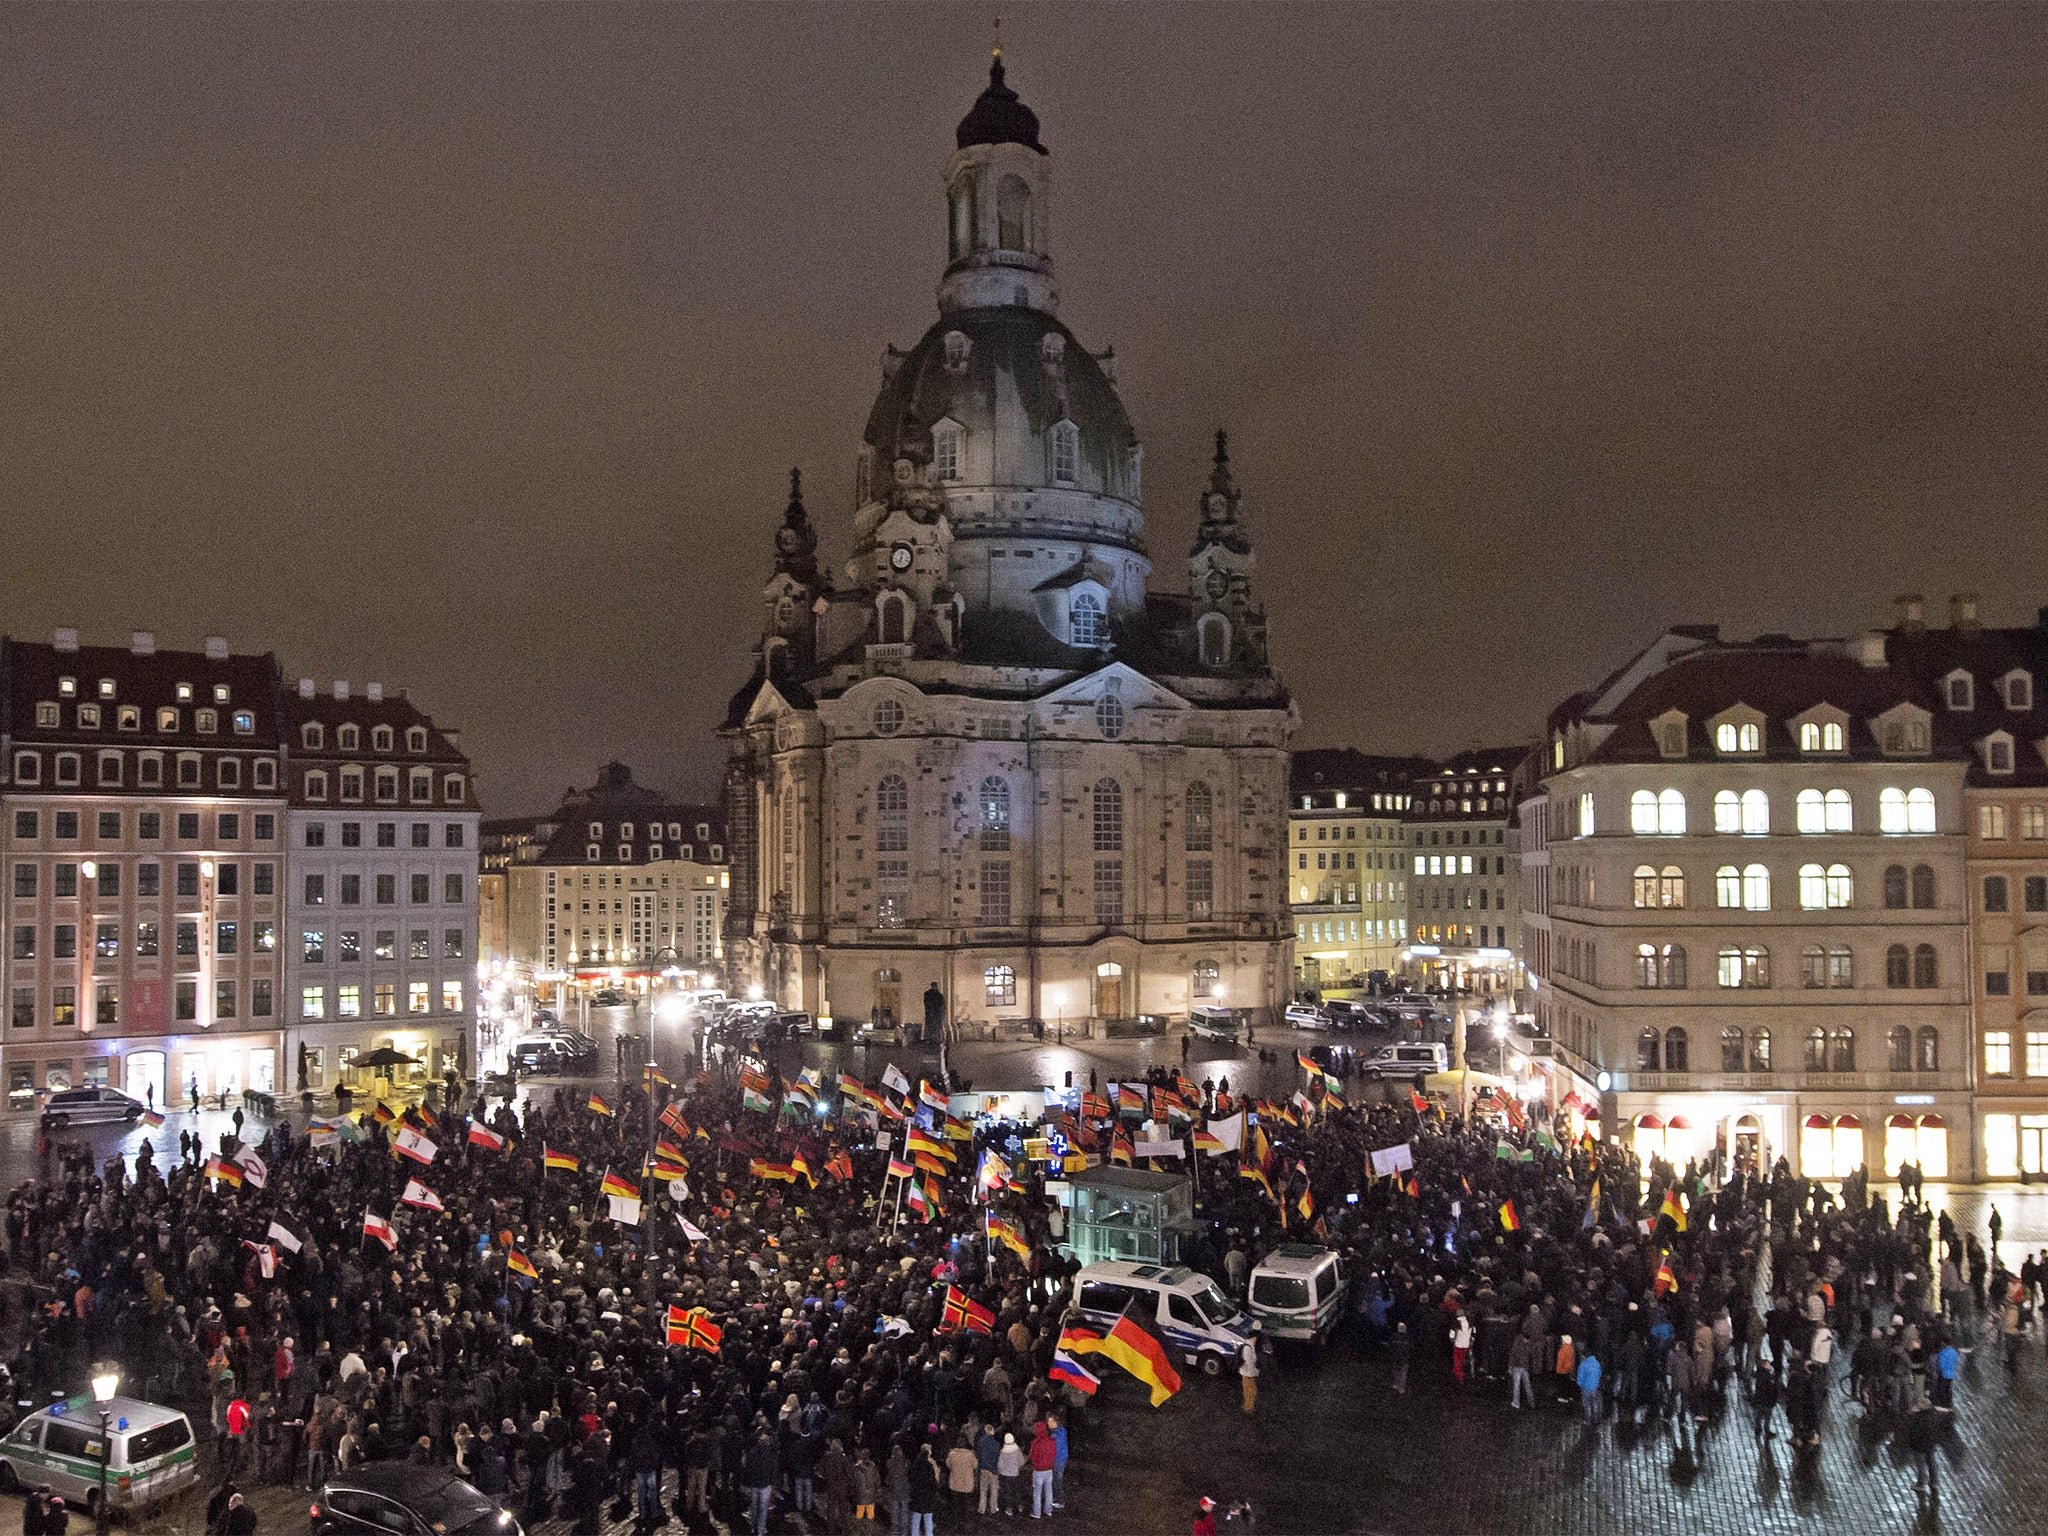 A far-right Pegida rally outside the Frauenkirche church in Dresden – their protests have attracted crowds of up to 25,000 people